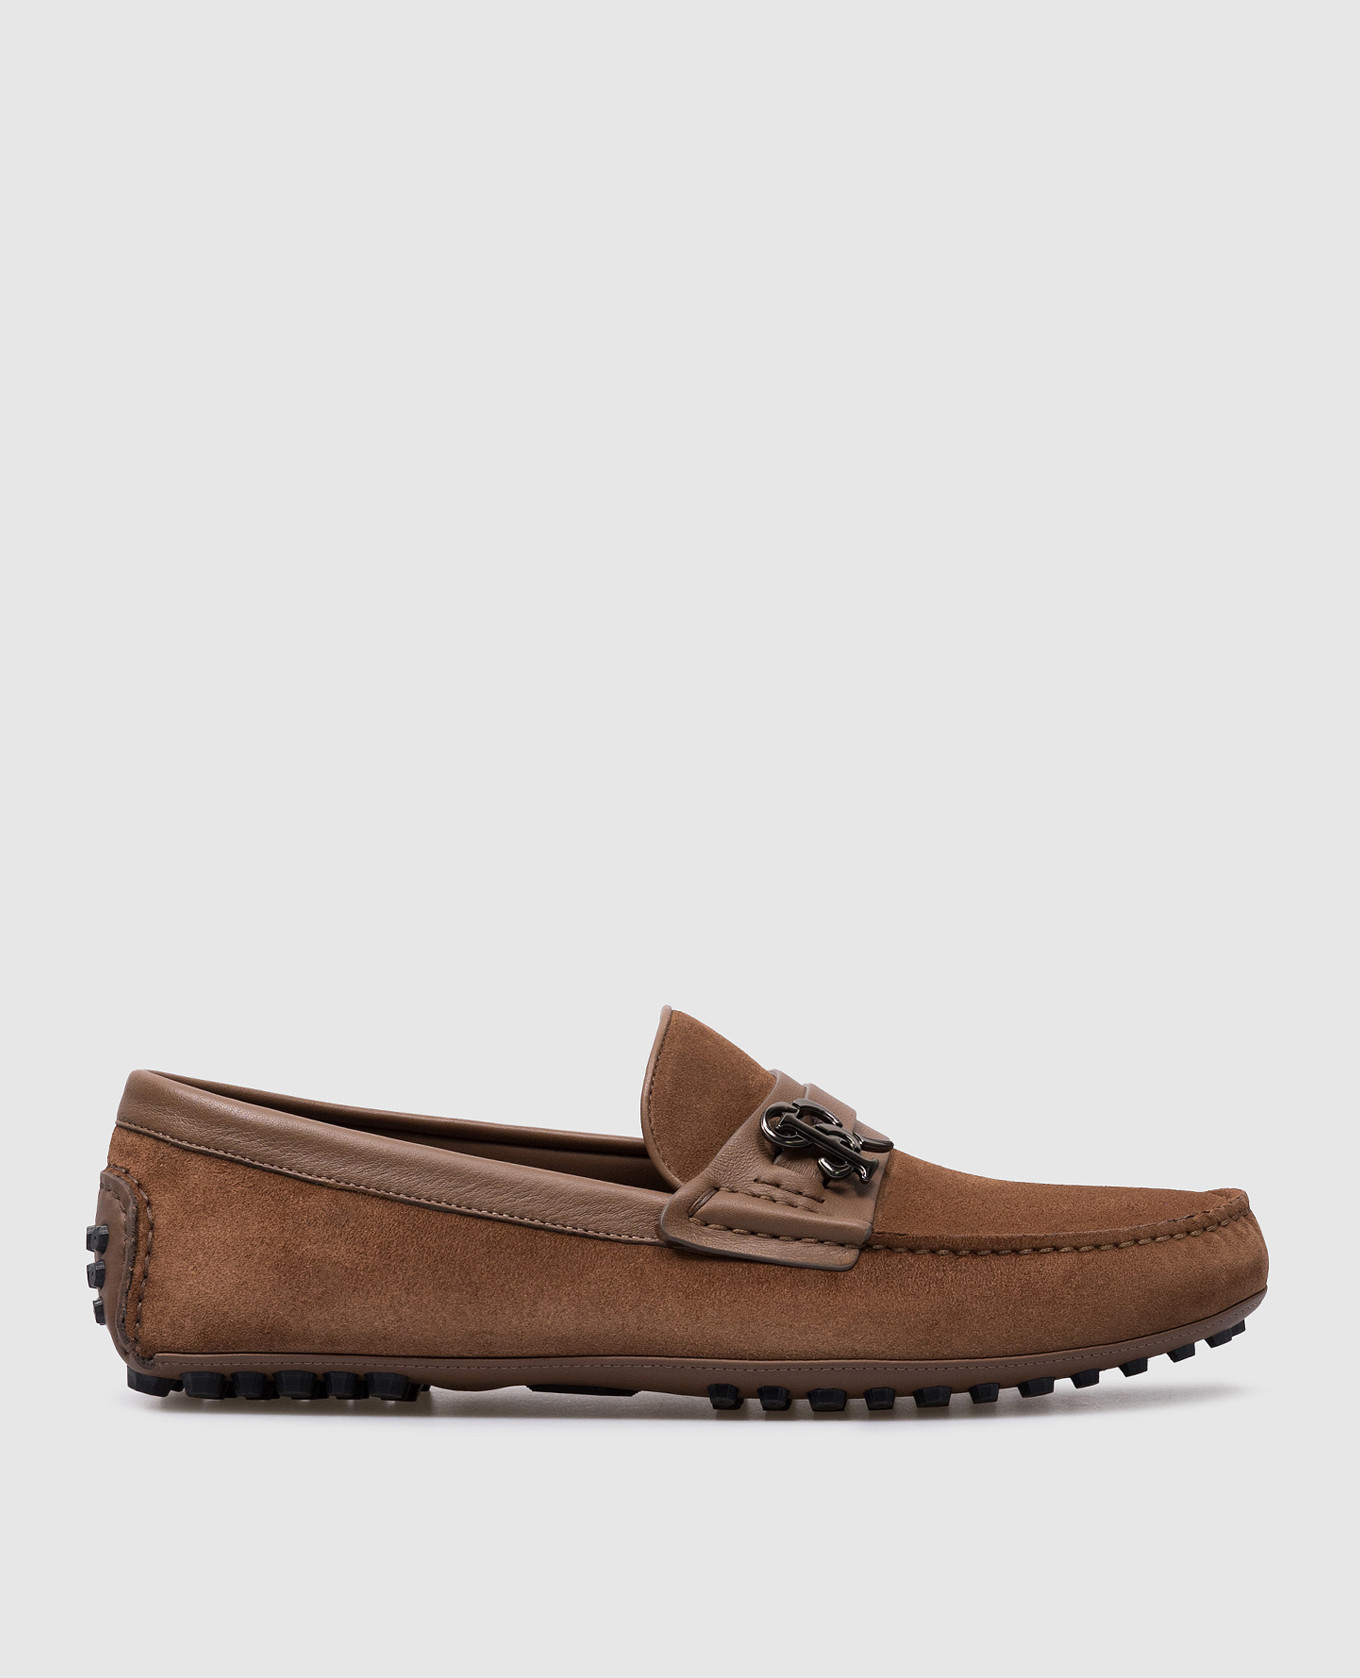 Brown suede moccasins with metallic logo